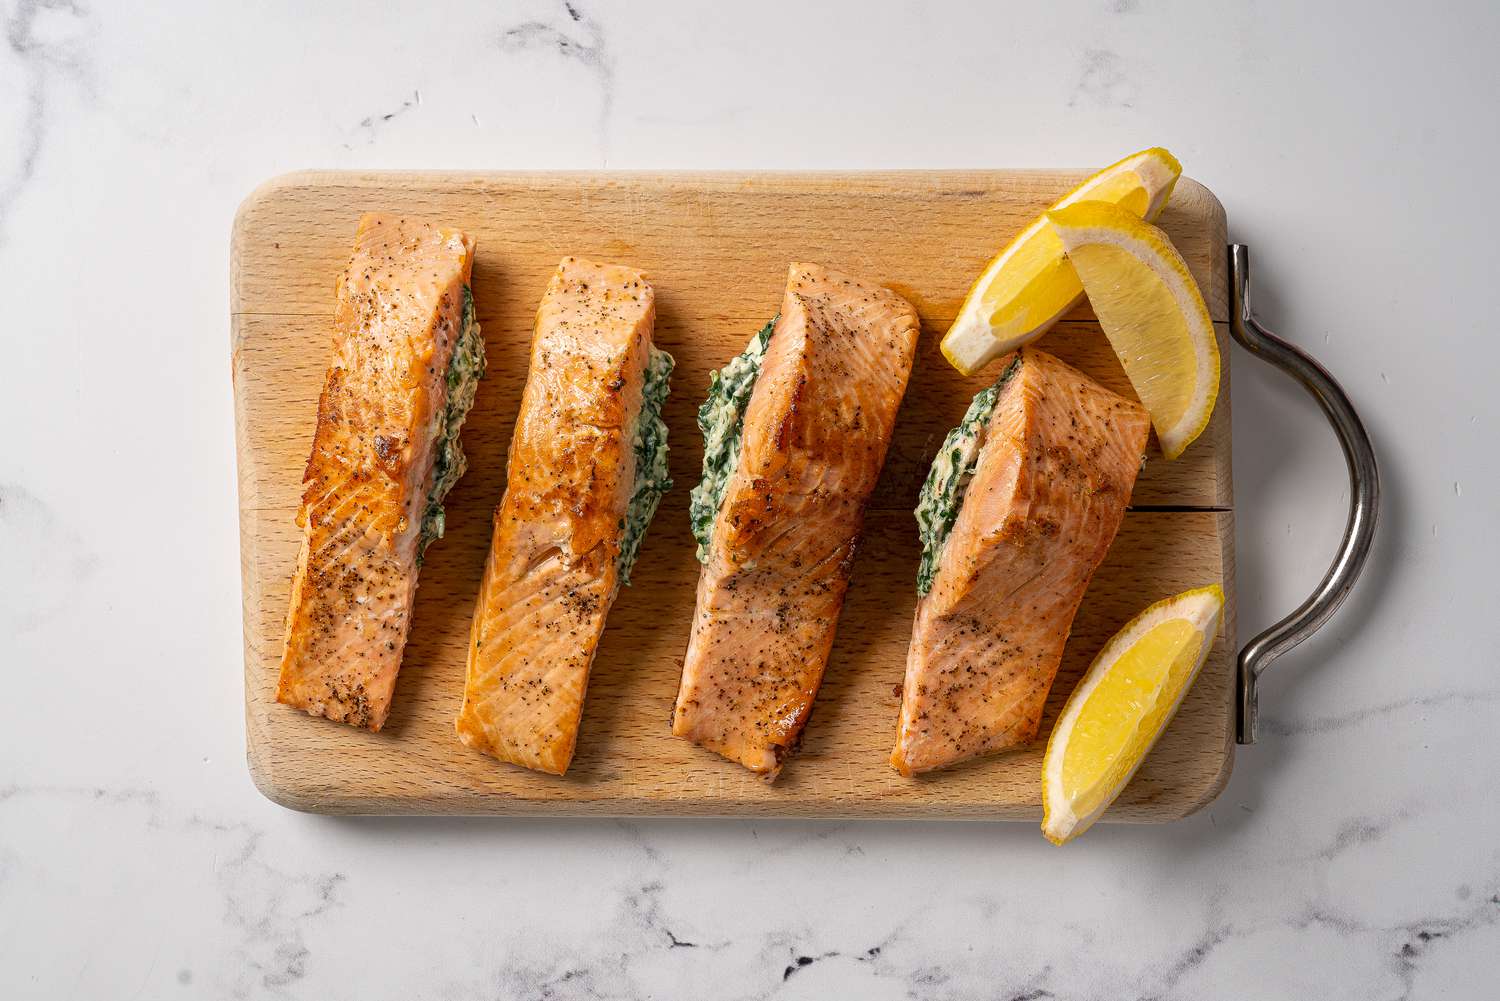 How To Grill Stuffed Salmon Fillets - Recipes.net